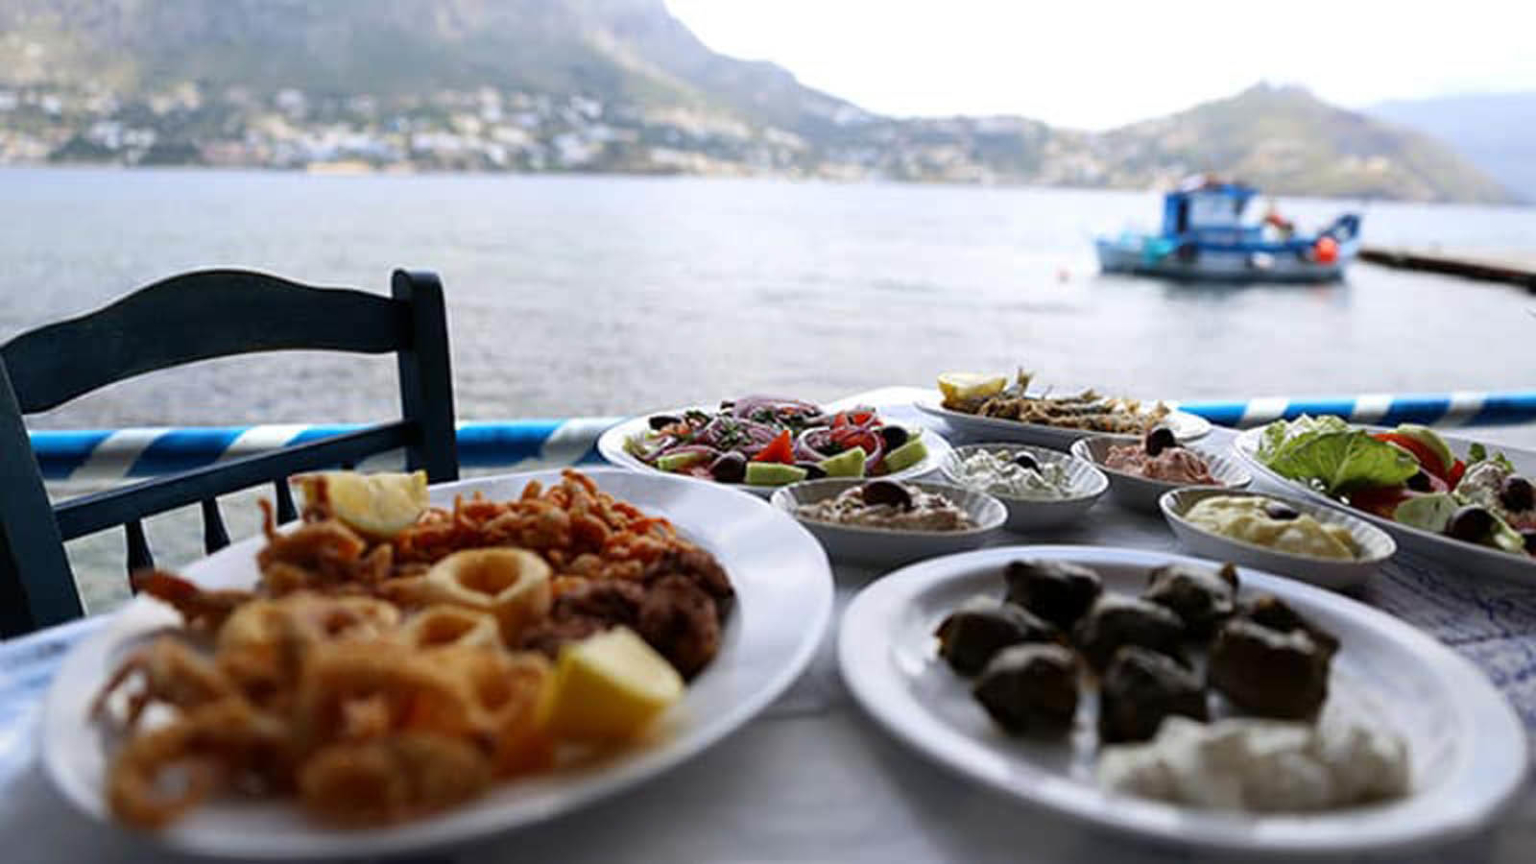 Greek Food Guide - Traditional Dishes to Eat in Greece | The Planet D